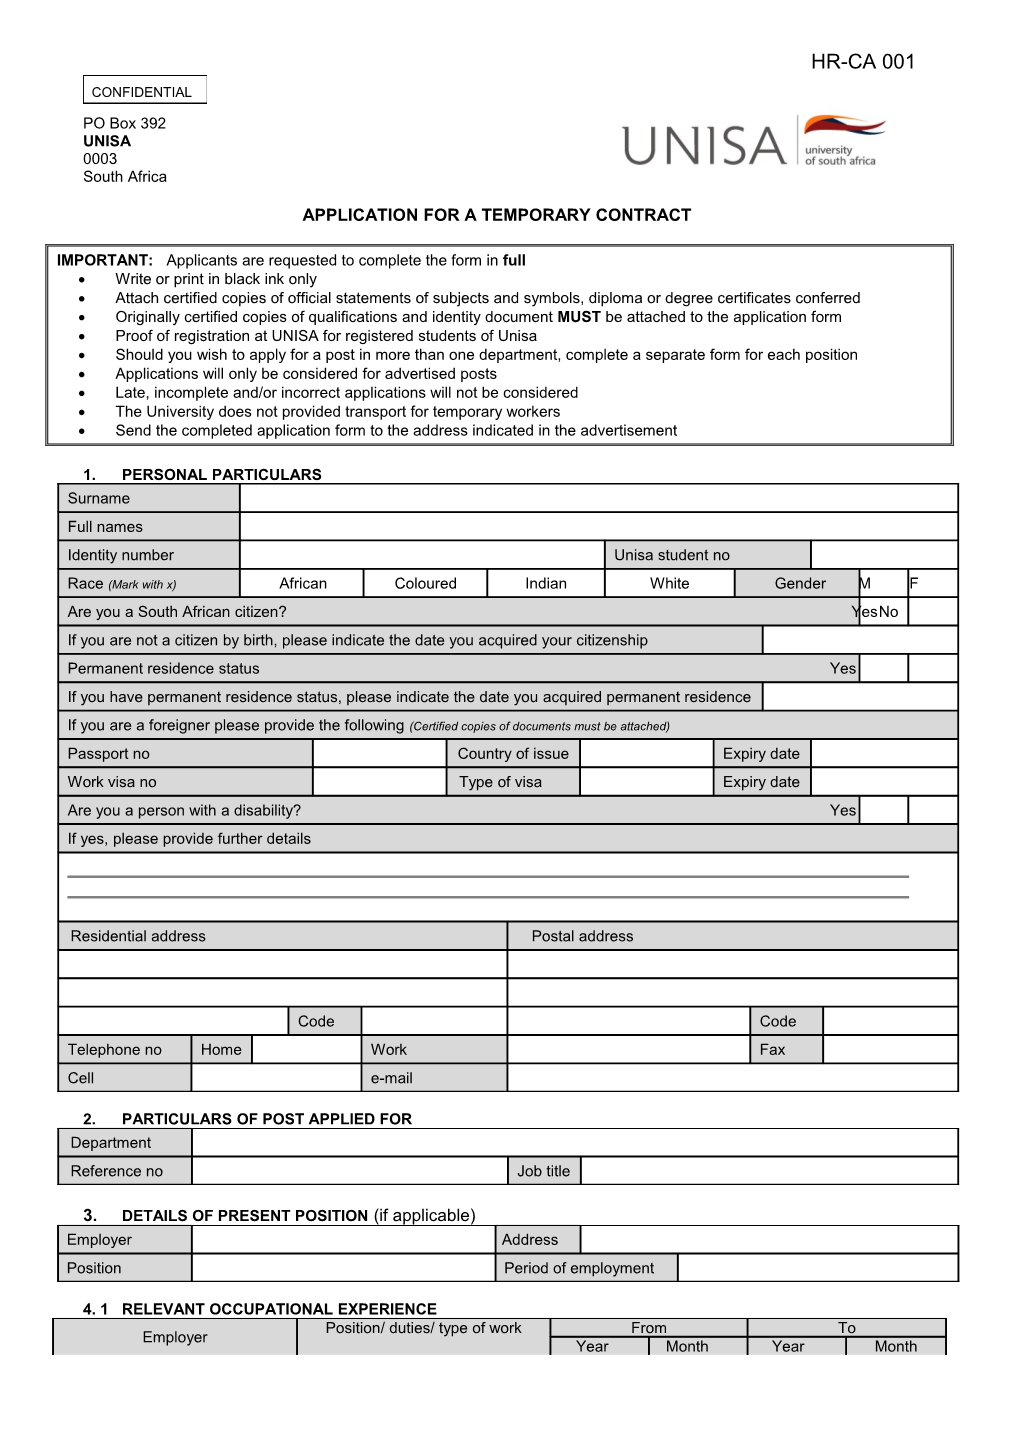 Application for a Temporary Contract